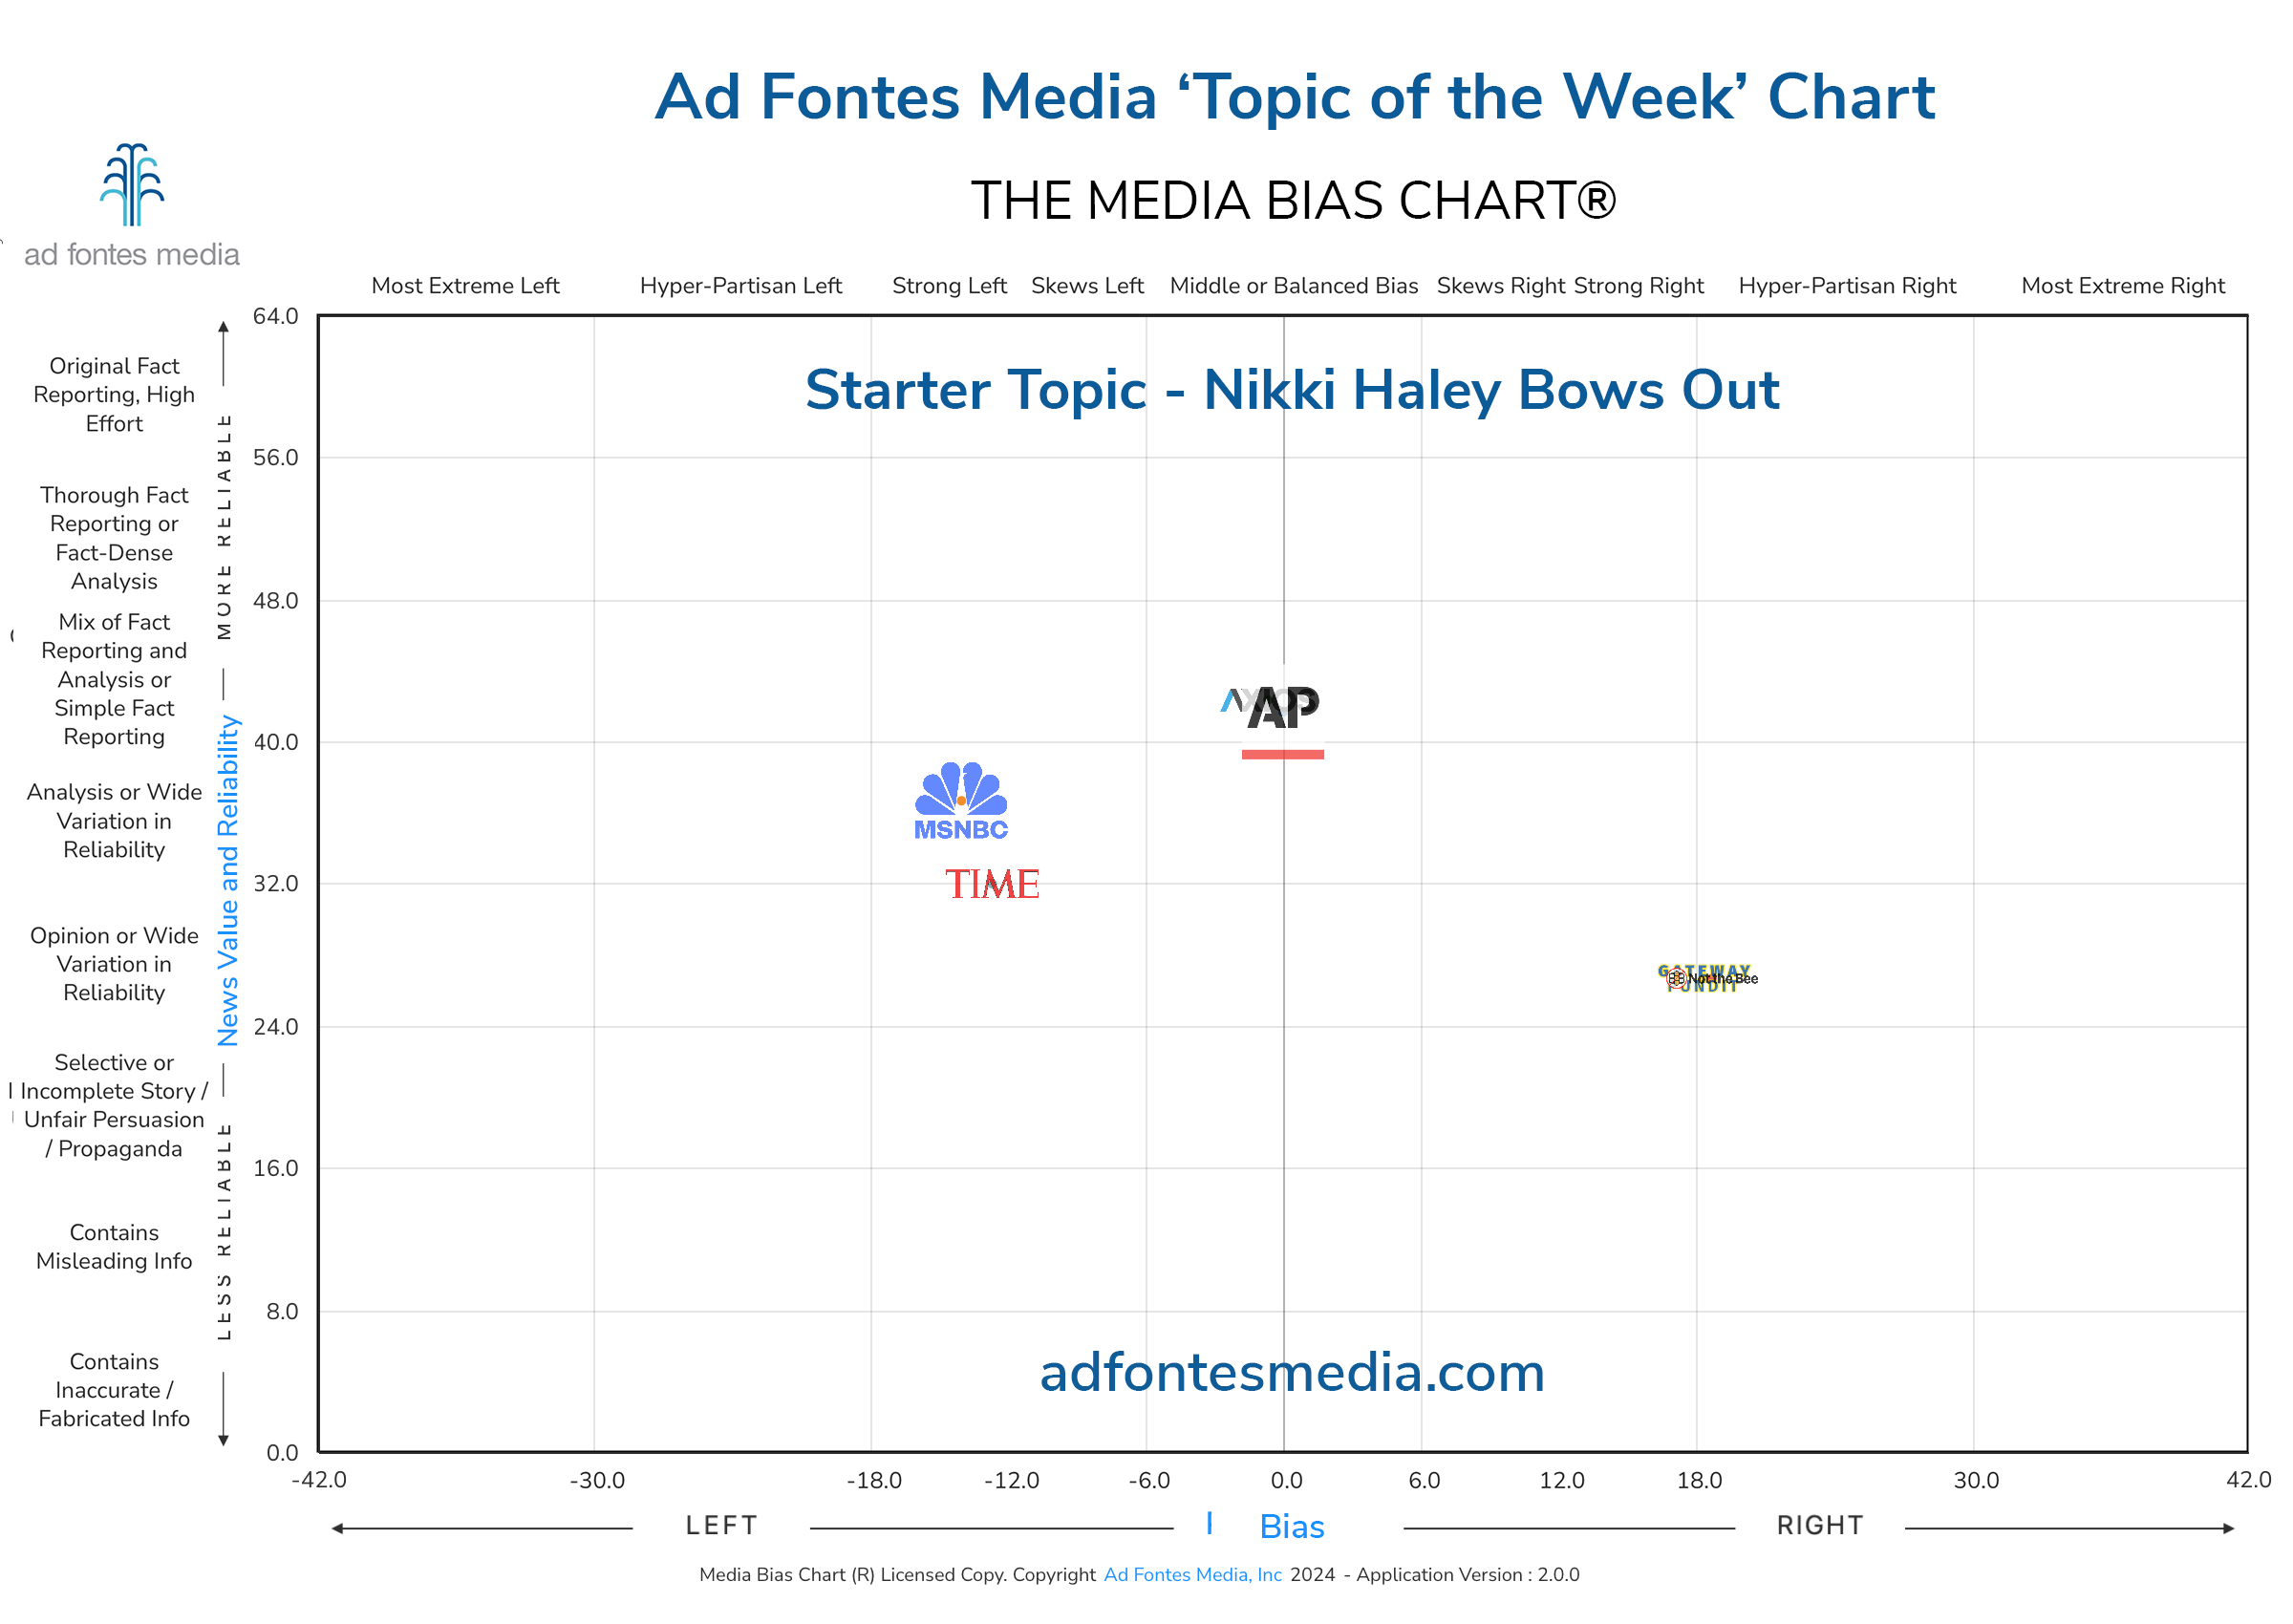 The Media Bias Chart takes a look at articles covering Haley’s decision to drop out of the race for the Republican primary